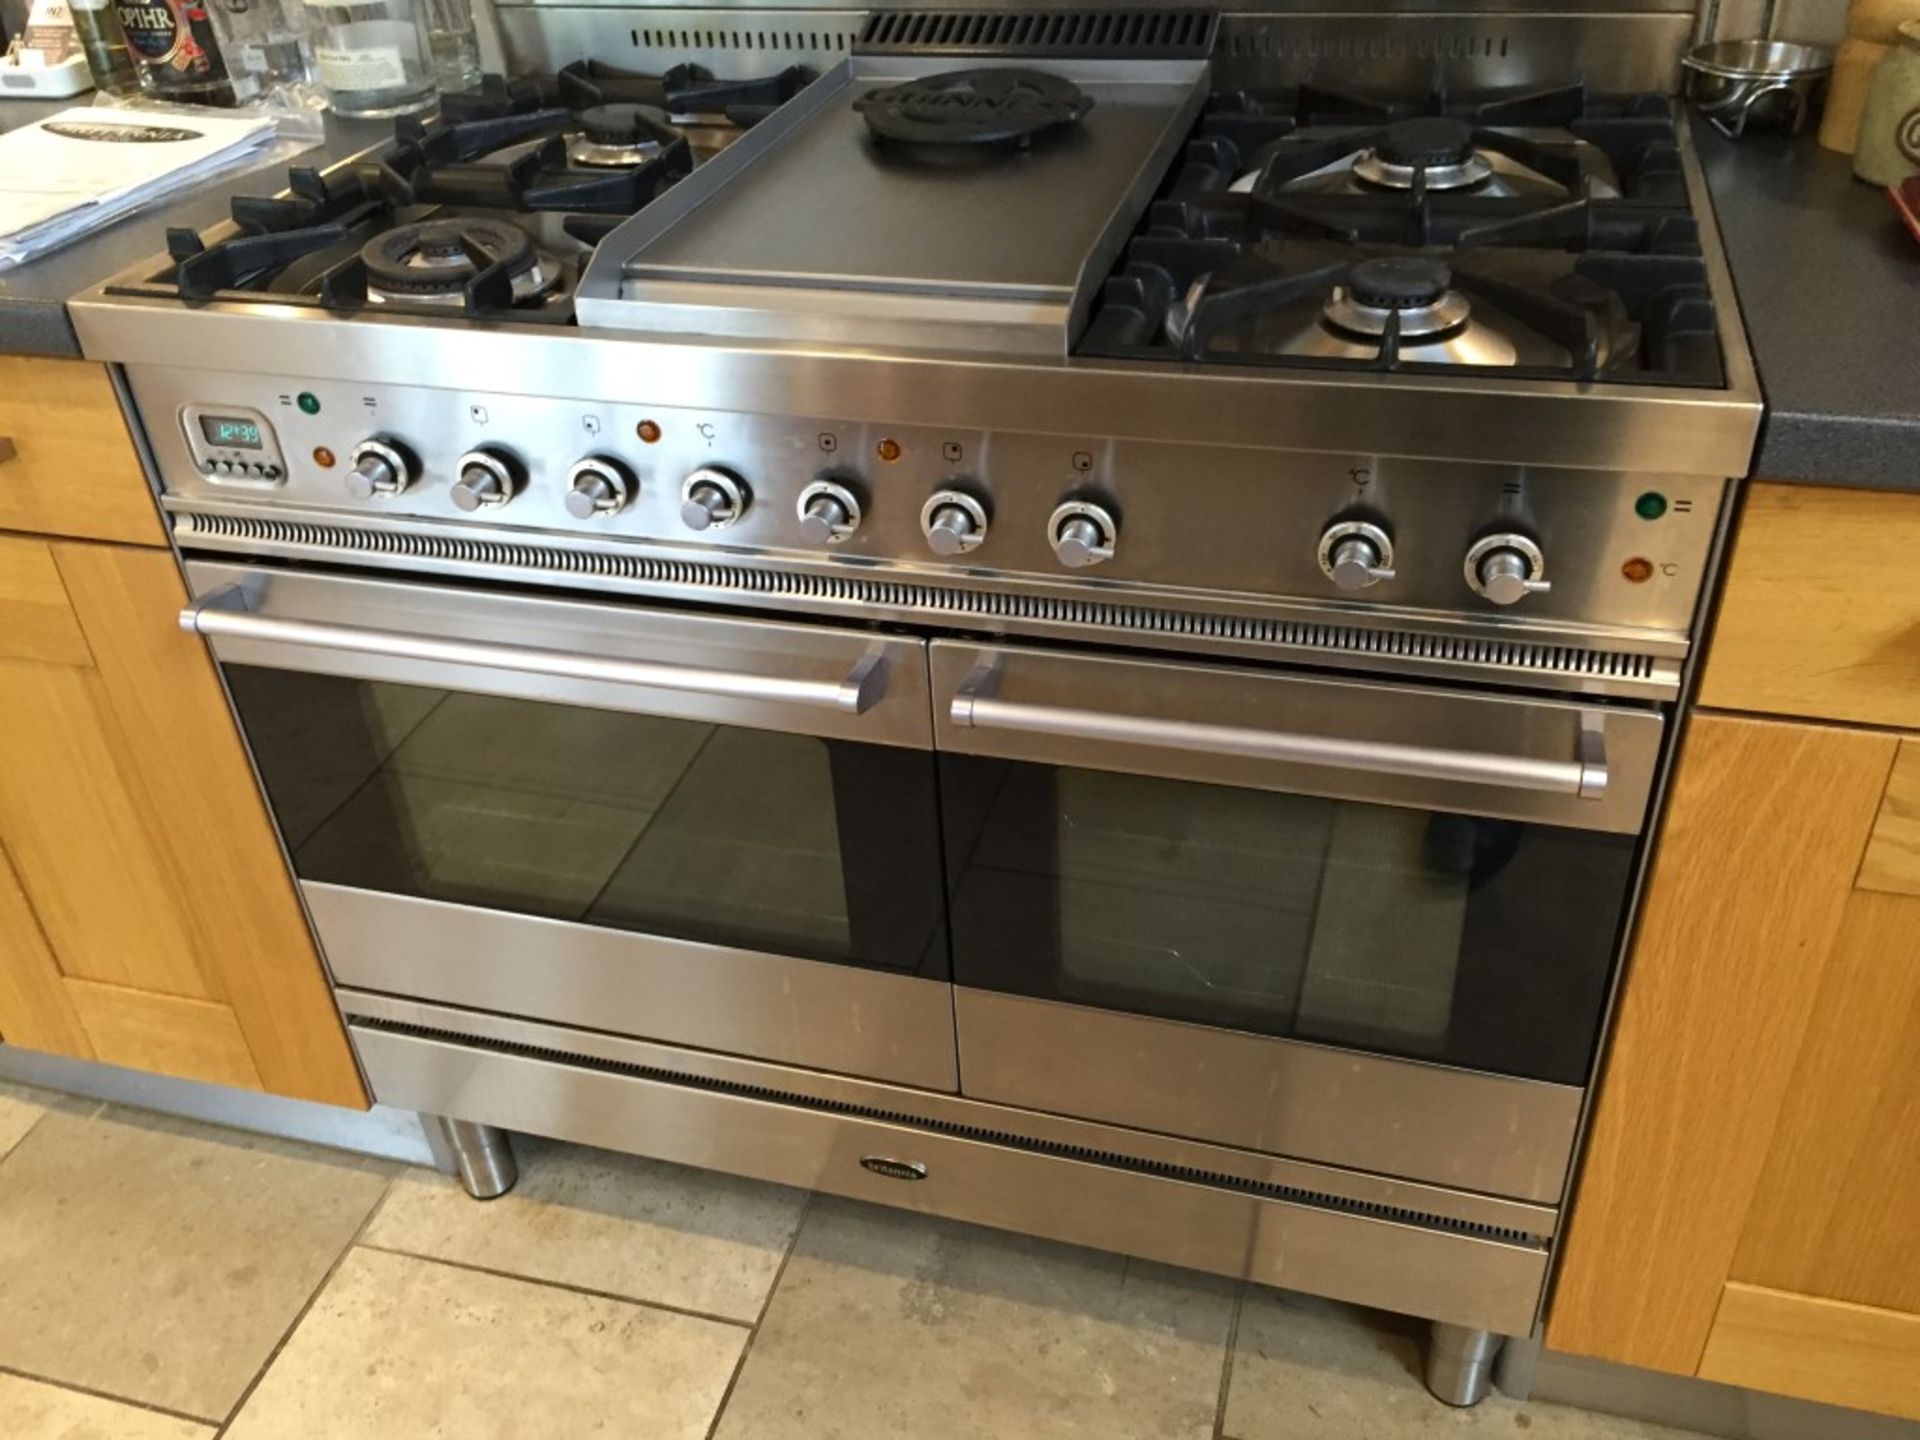 1 x Britannia Classic Range Cooker With Britannia Extractor Hood - Excellent Working Condition - Image 10 of 11